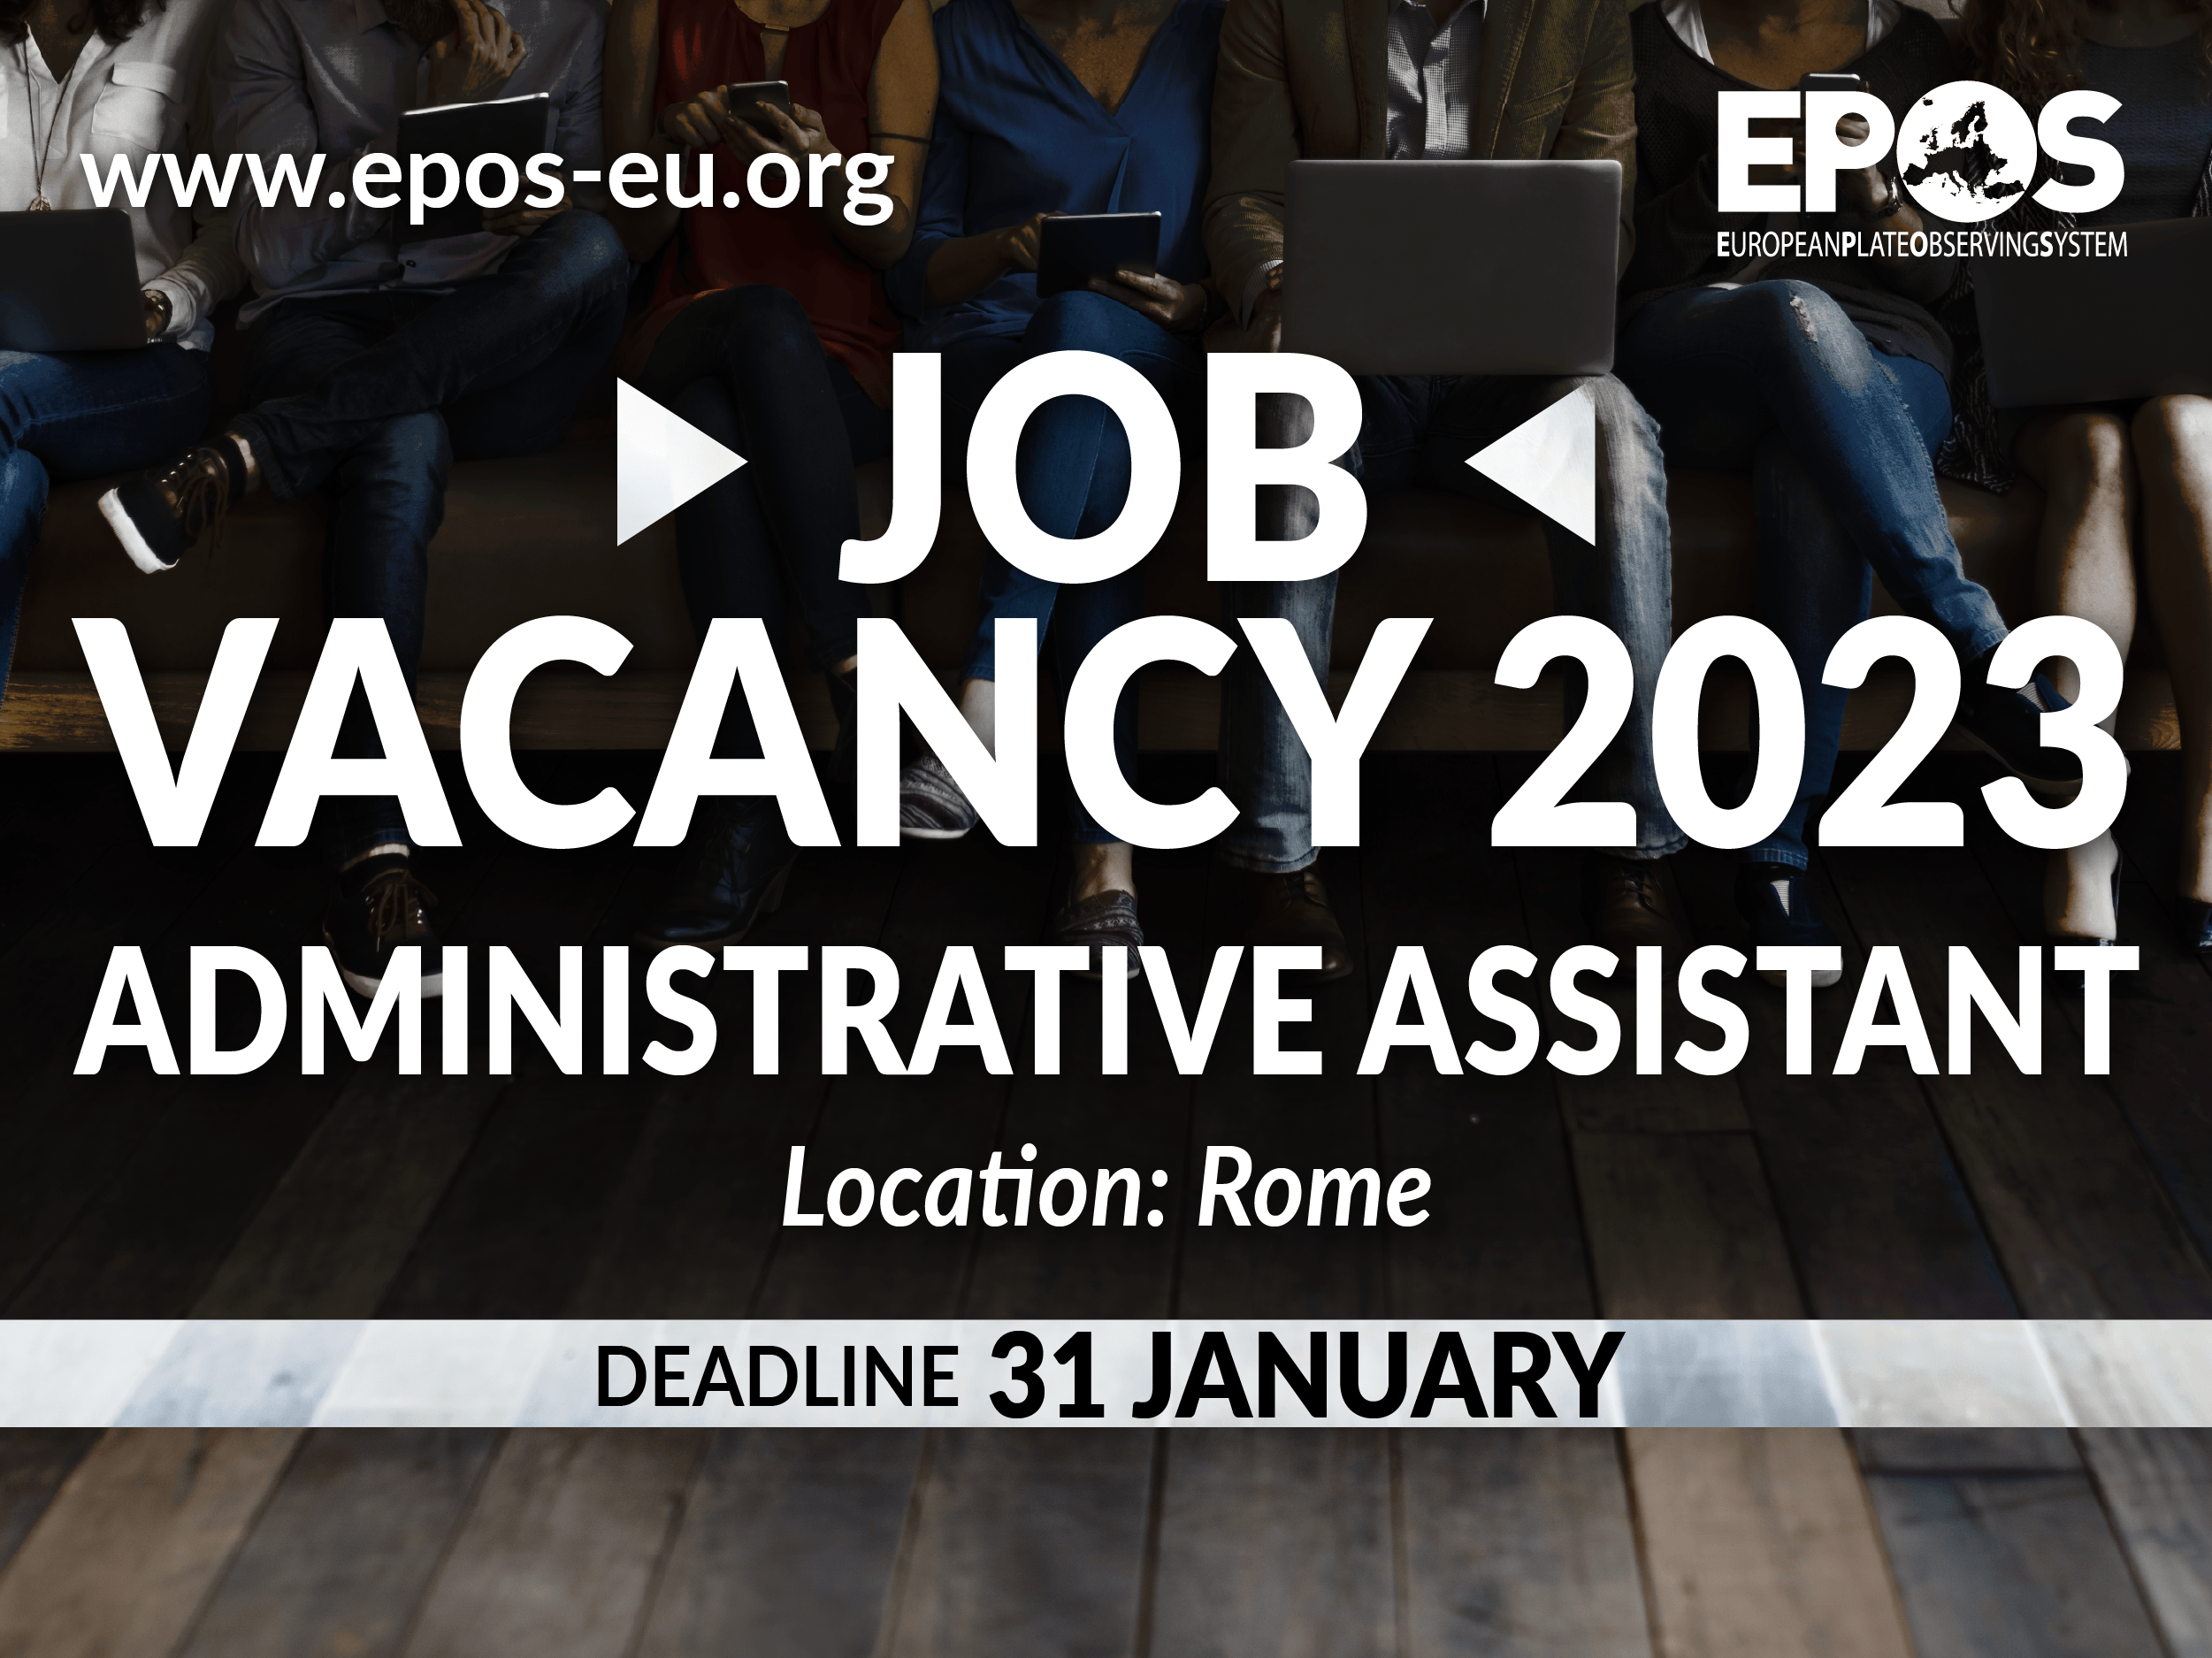  Job Opportunity at EPOS: we are looking for an Administrative Assistant!